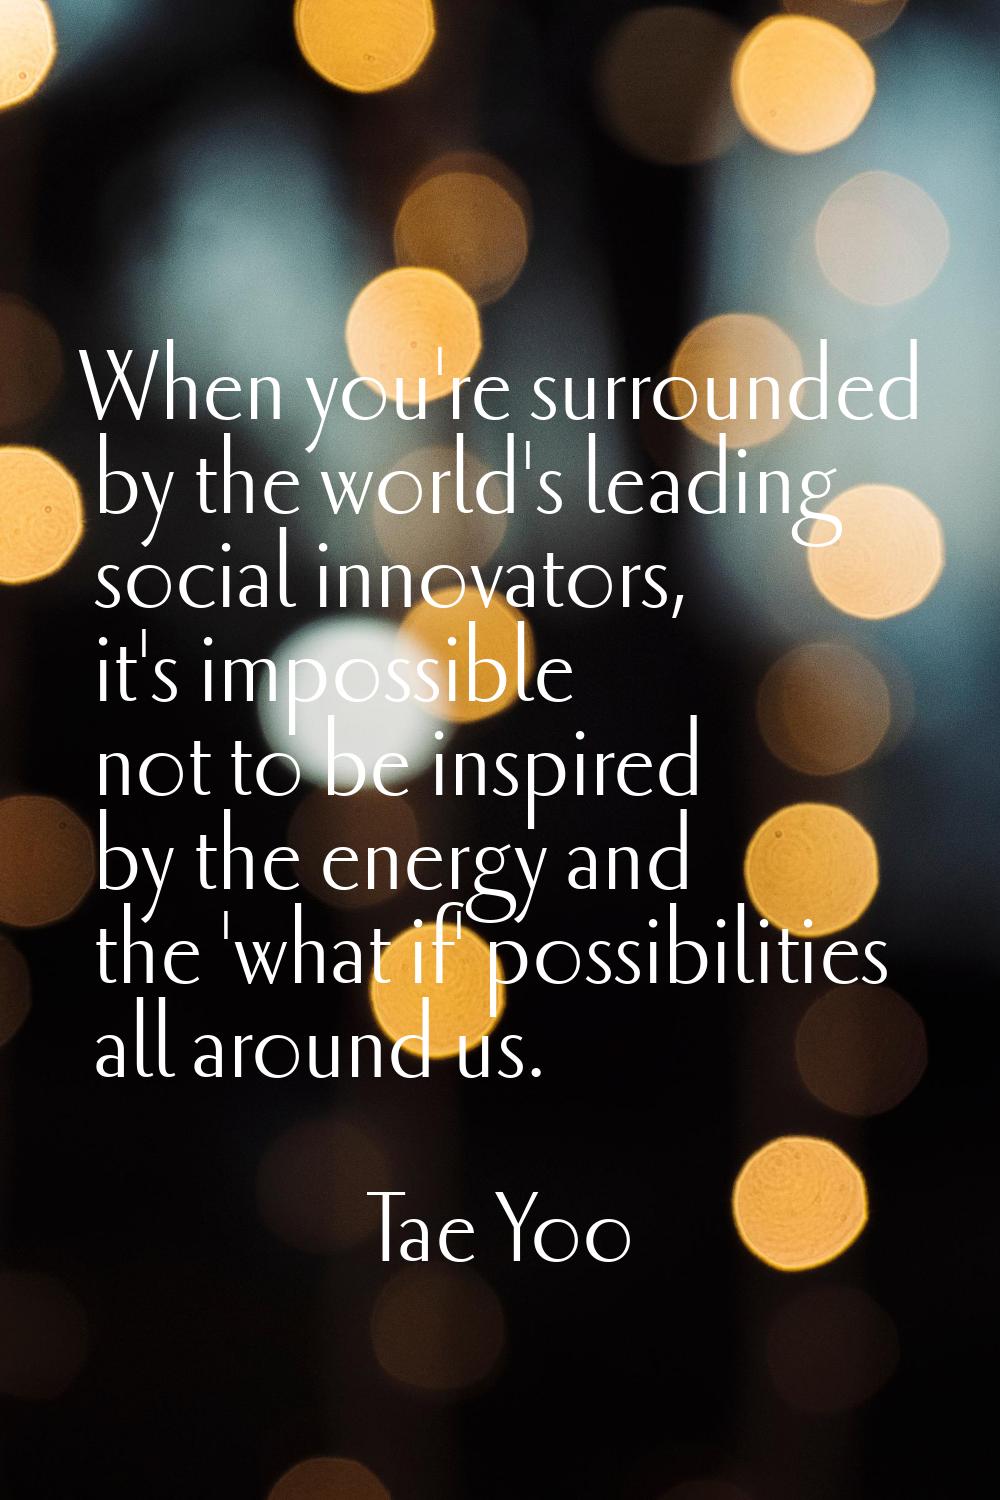 When you're surrounded by the world's leading social innovators, it's impossible not to be inspired